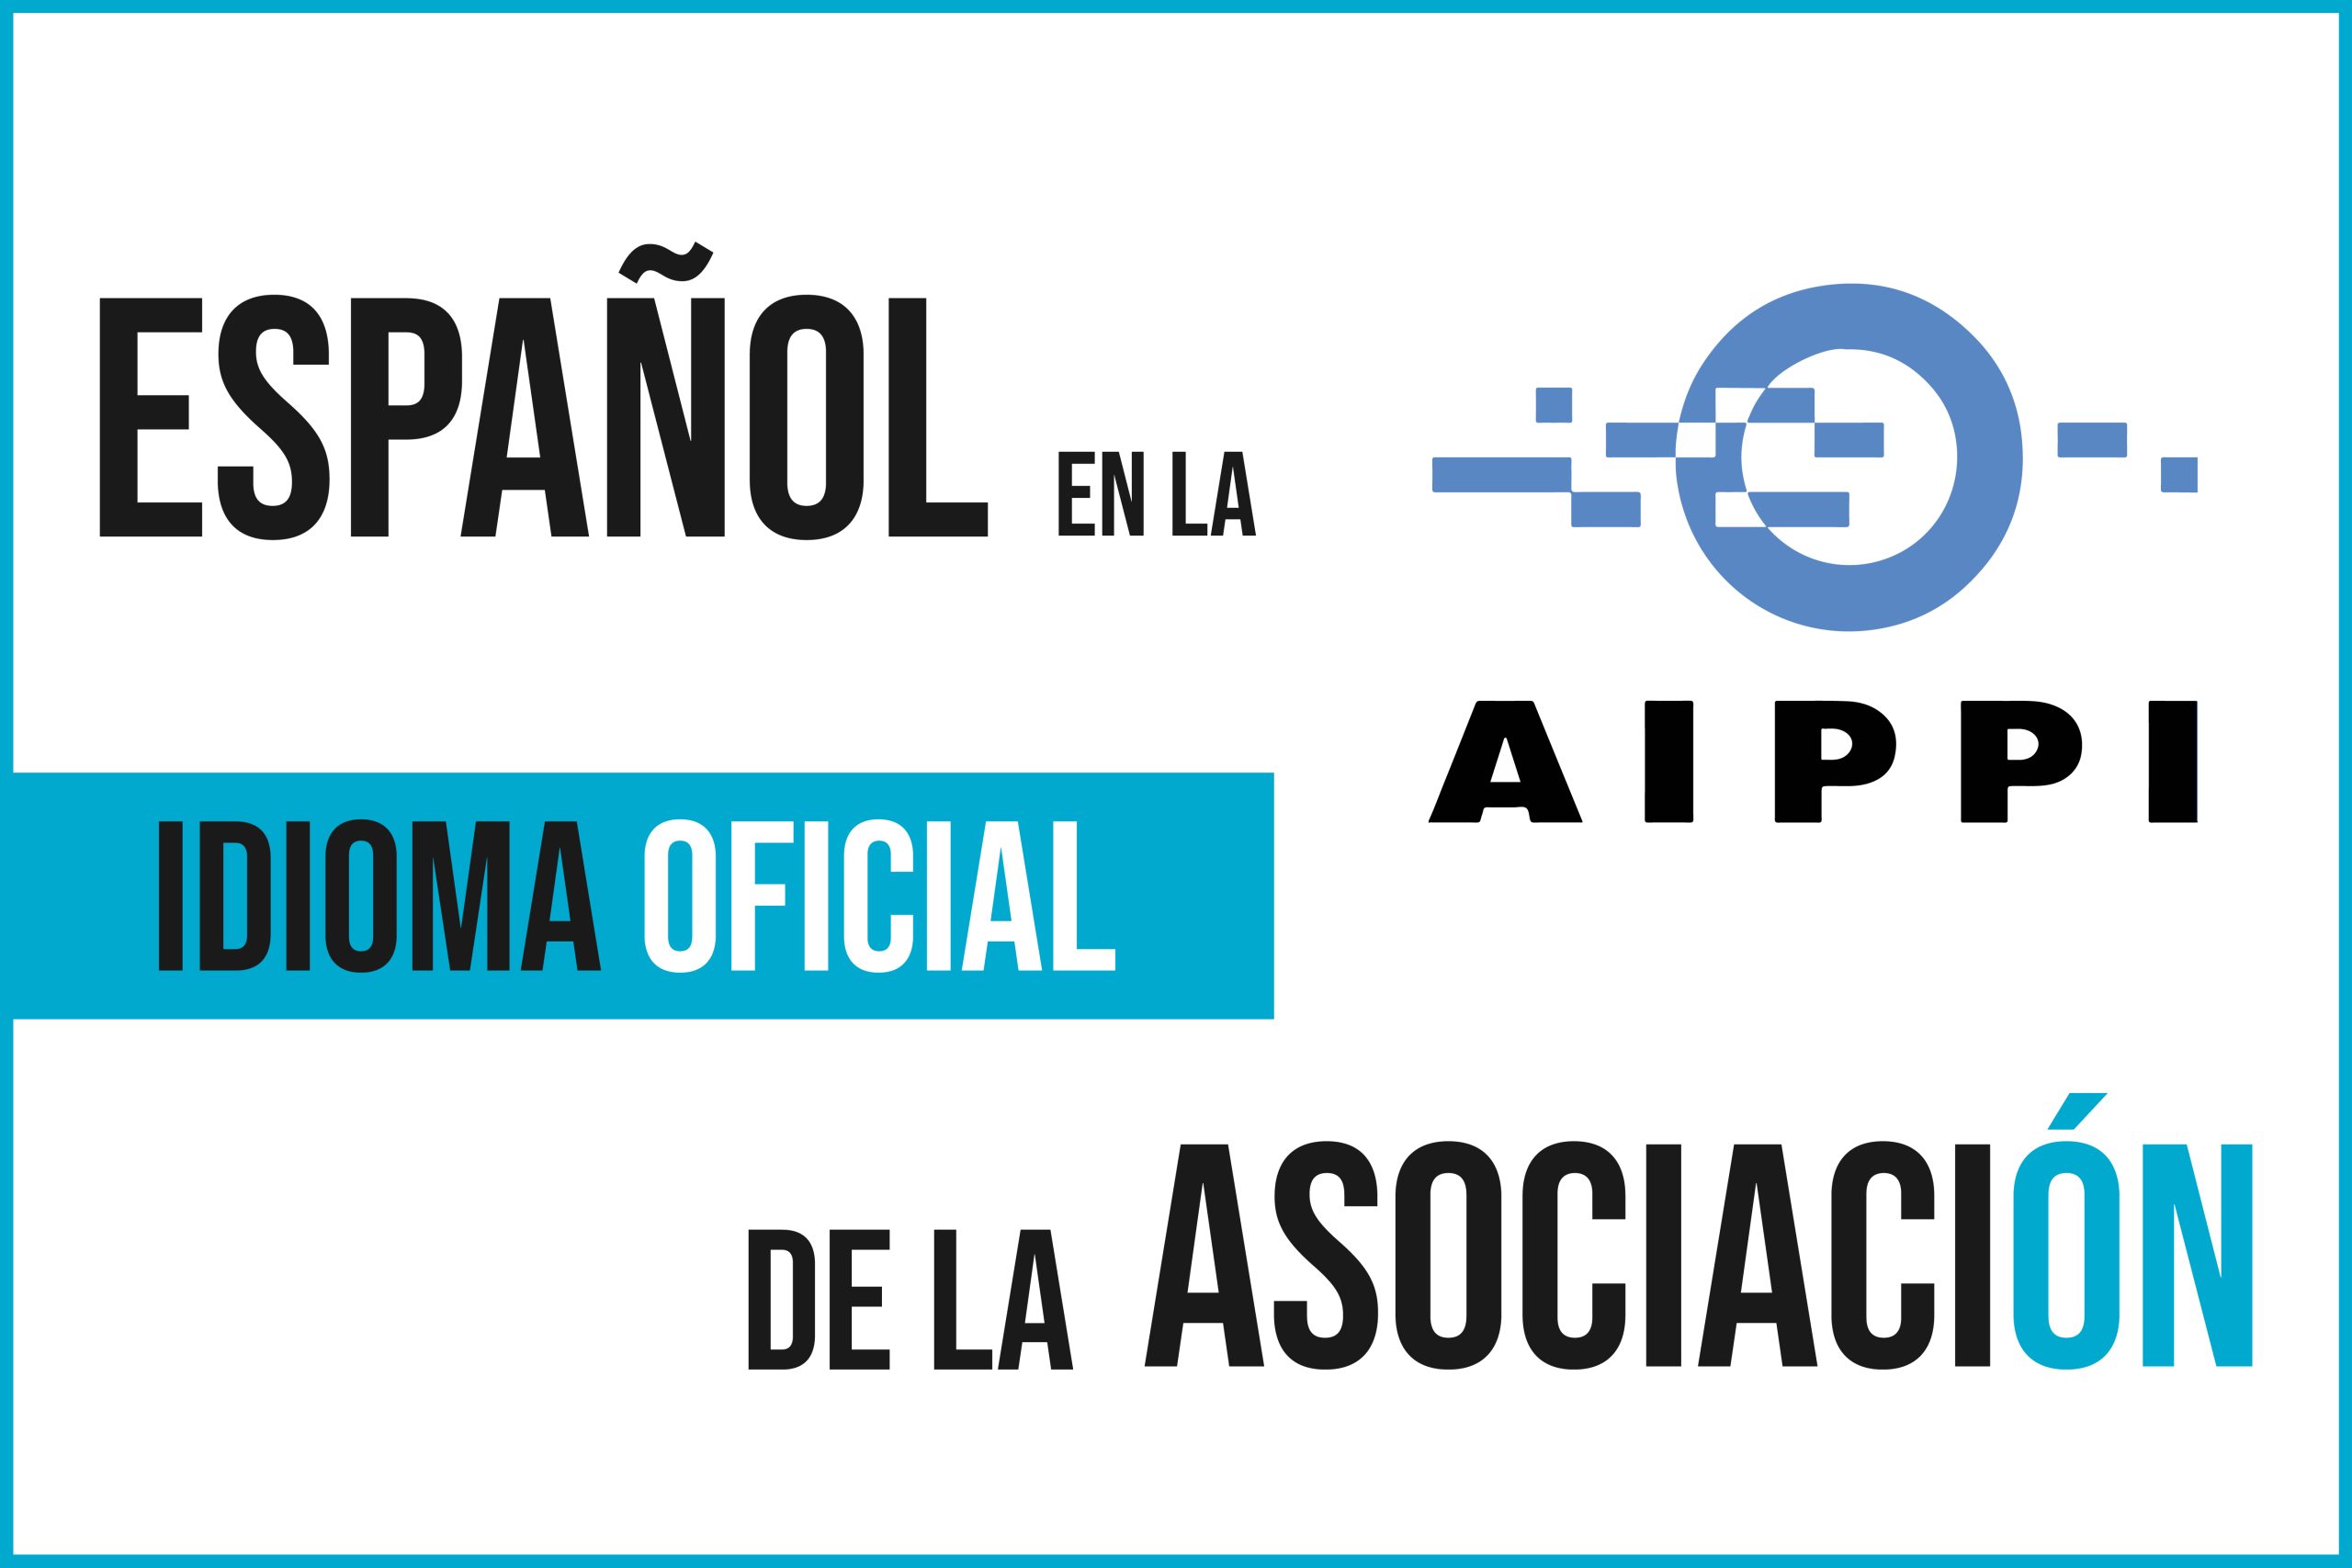 Spanish is the official language of the aippi association